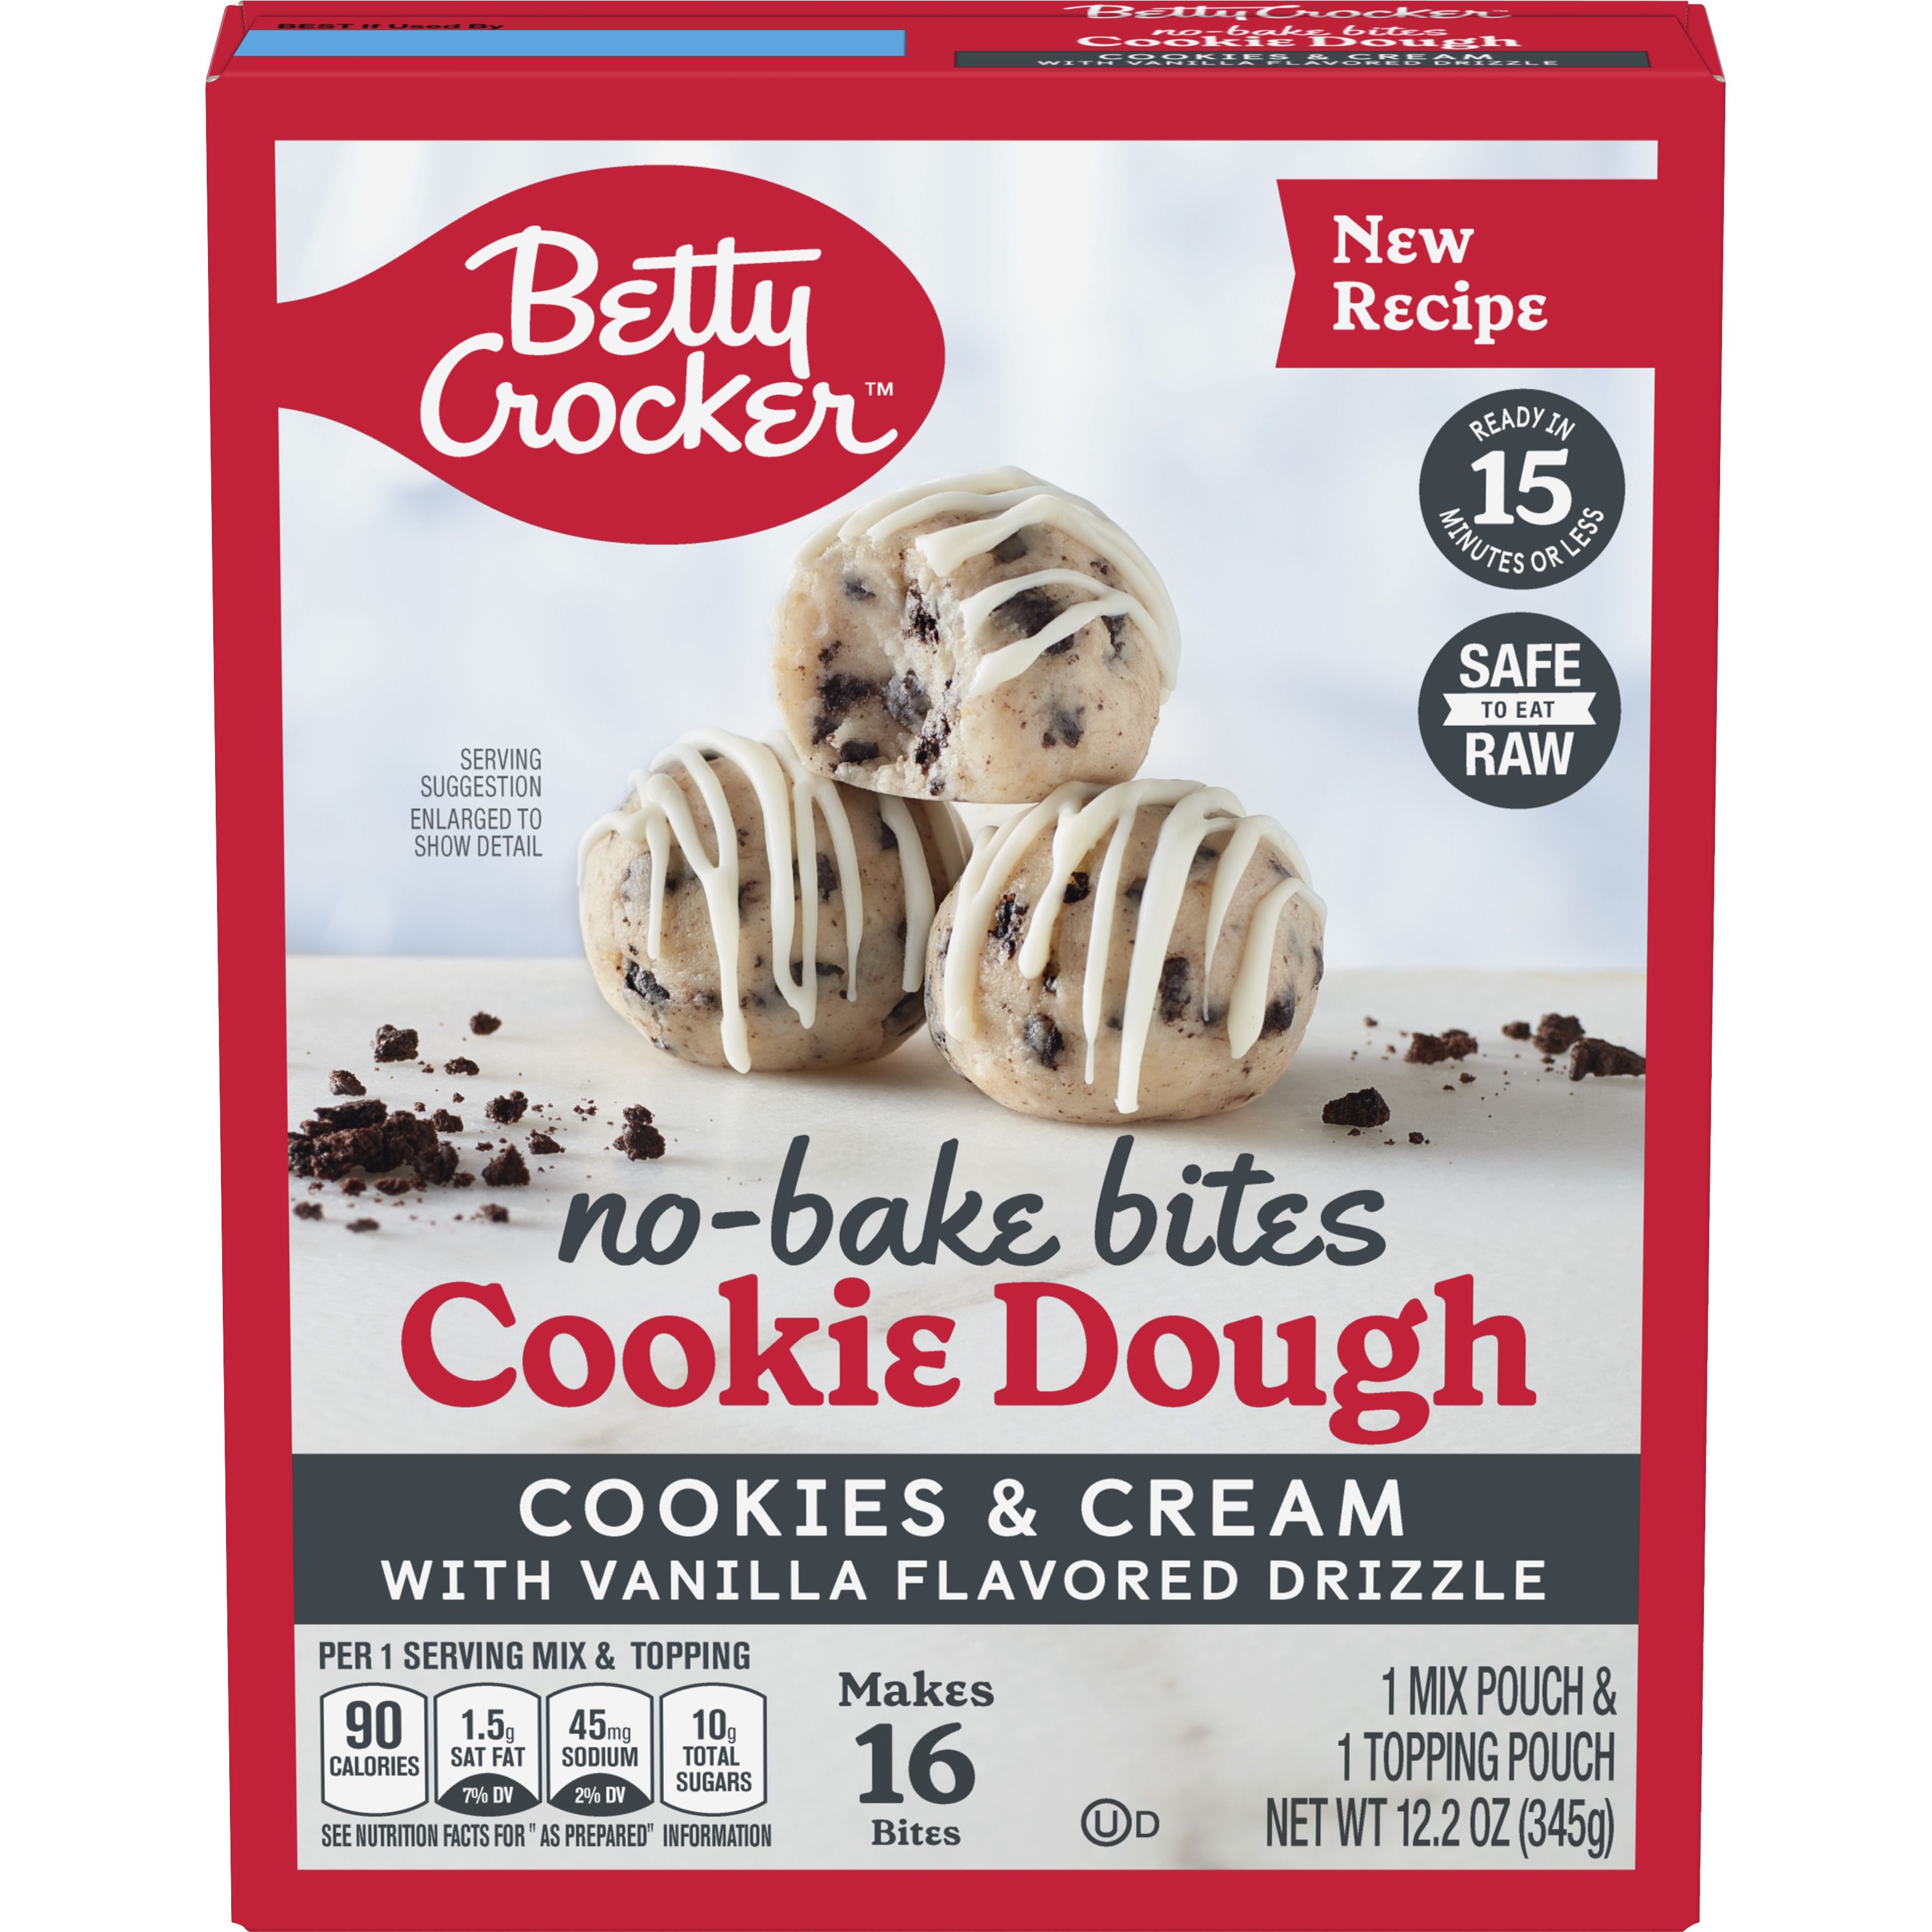 Betty Crocker™ No-Bake Bites Cookie Dough, Cookies & Cream with Vanilla Flavored Drizzle - Front